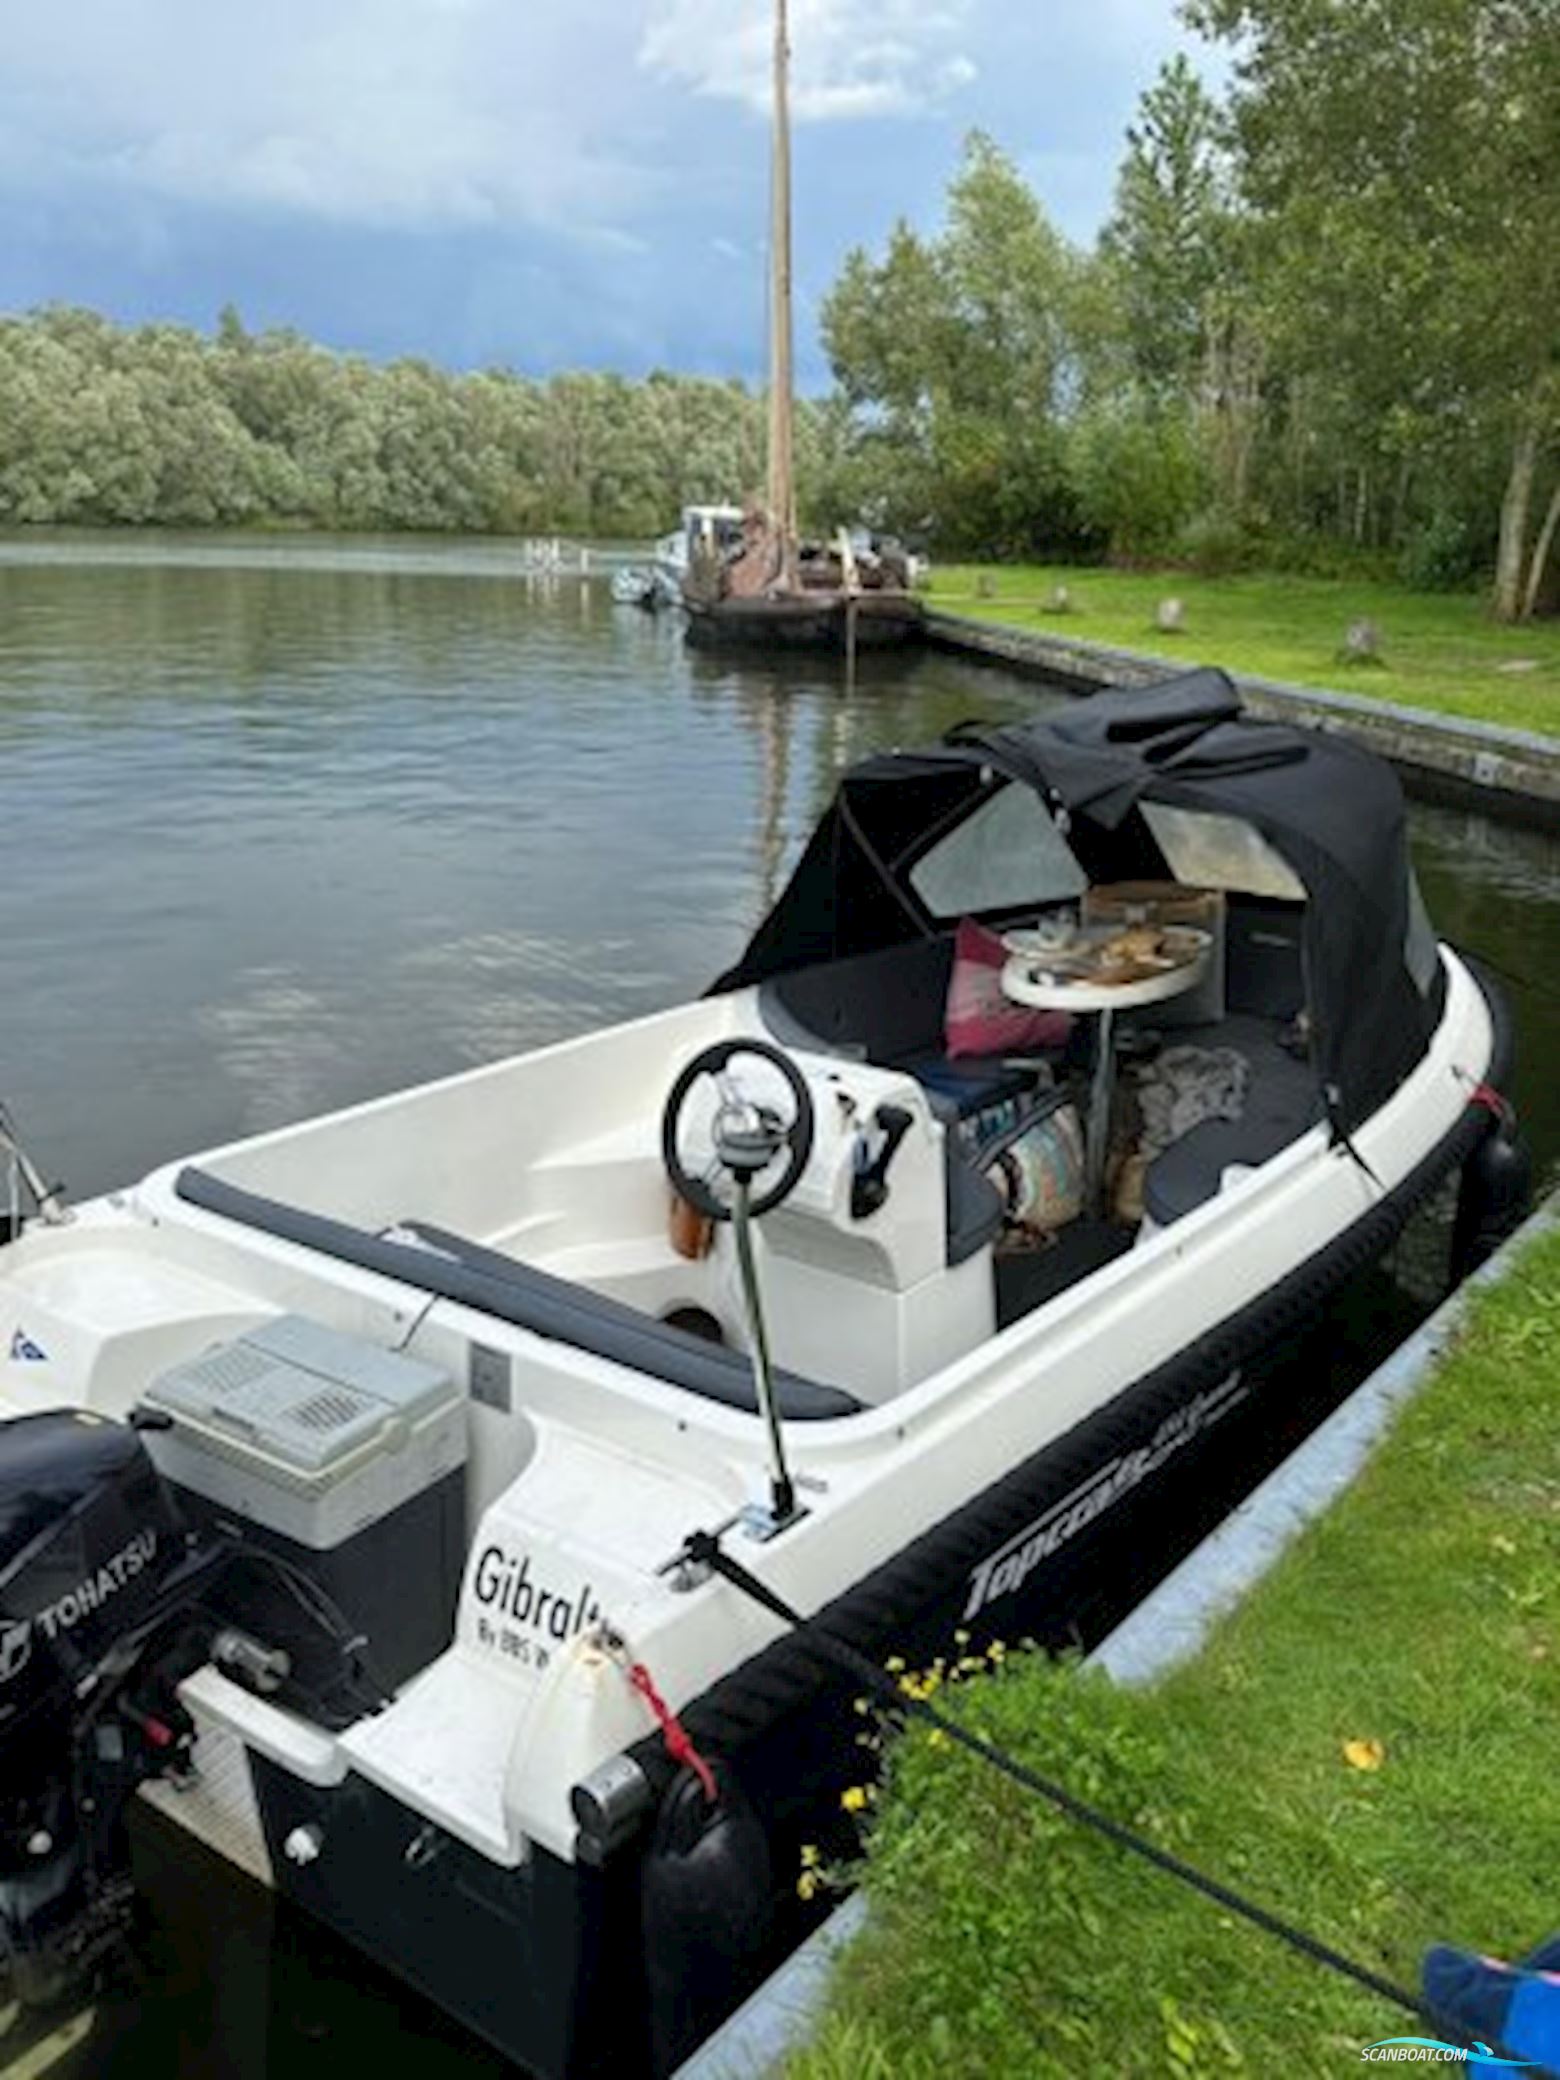 Topcraft 484 Grand Limited Motor boat 2019, with Tohatsu engine, The Netherlands